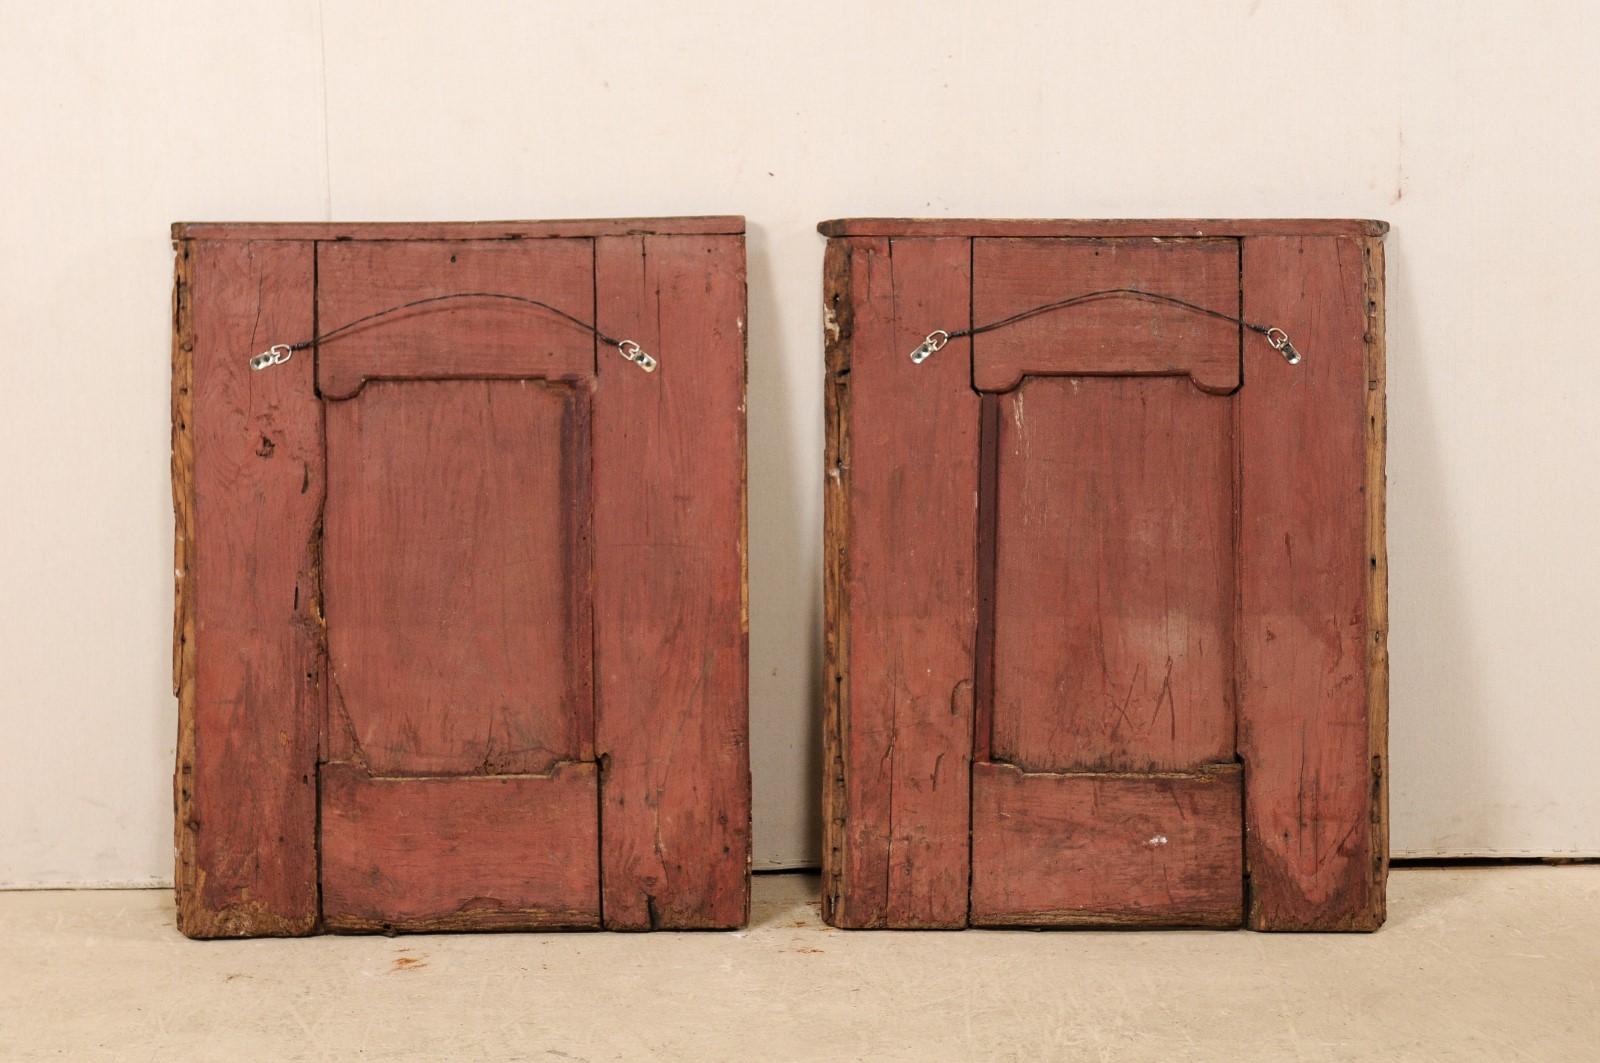 Pair of Italian Decorative Wall Panels from Turn of 18th-19th Century  7